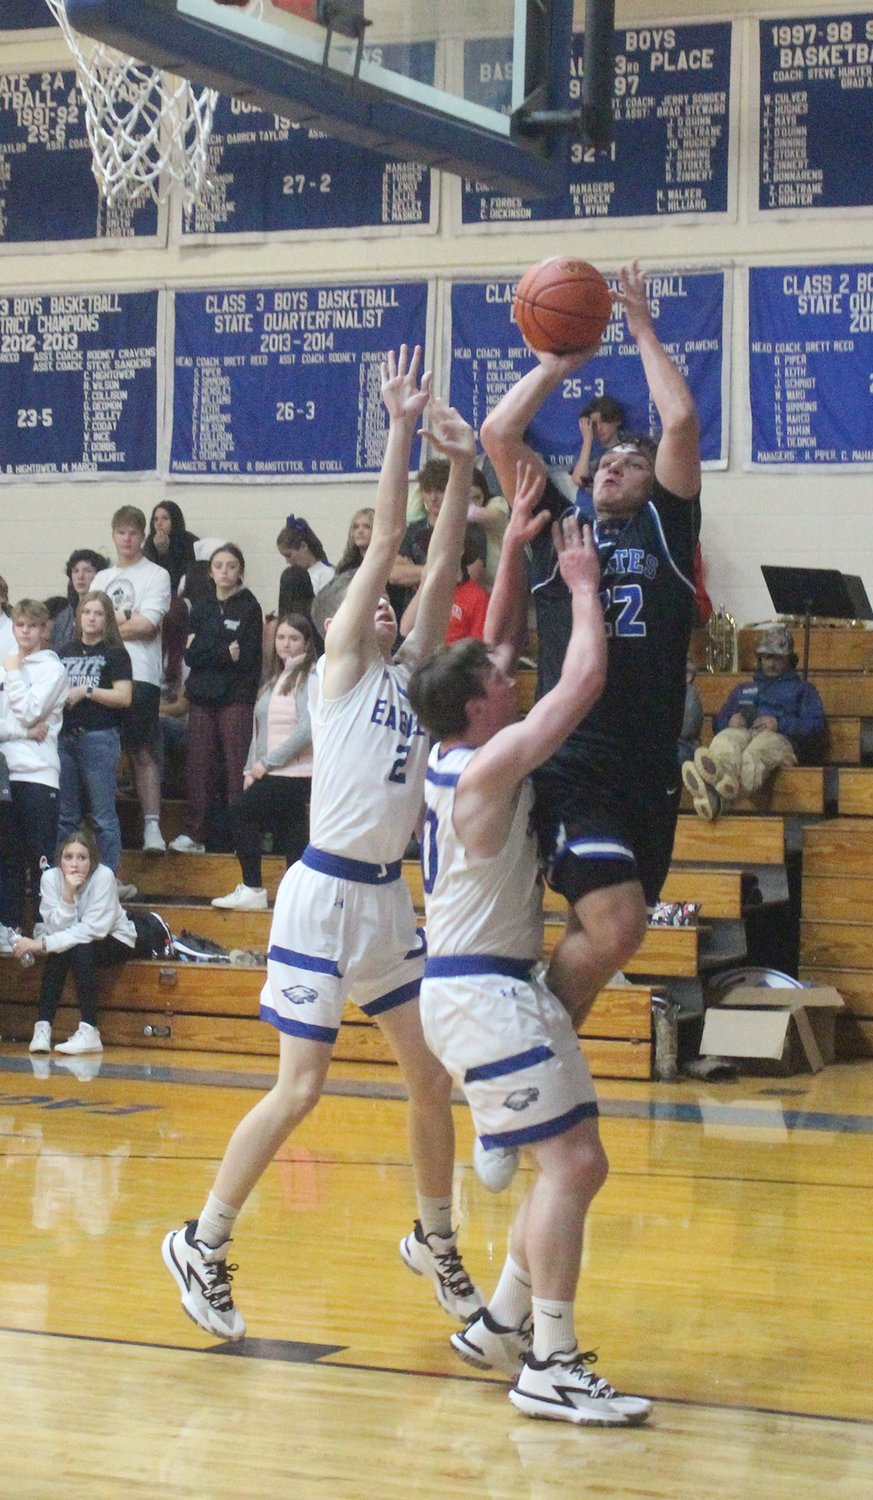 Norwood’s Gavin McGraw takes a shot while being defended by Hartville’s Jalon Cryer and Jackson Ward.